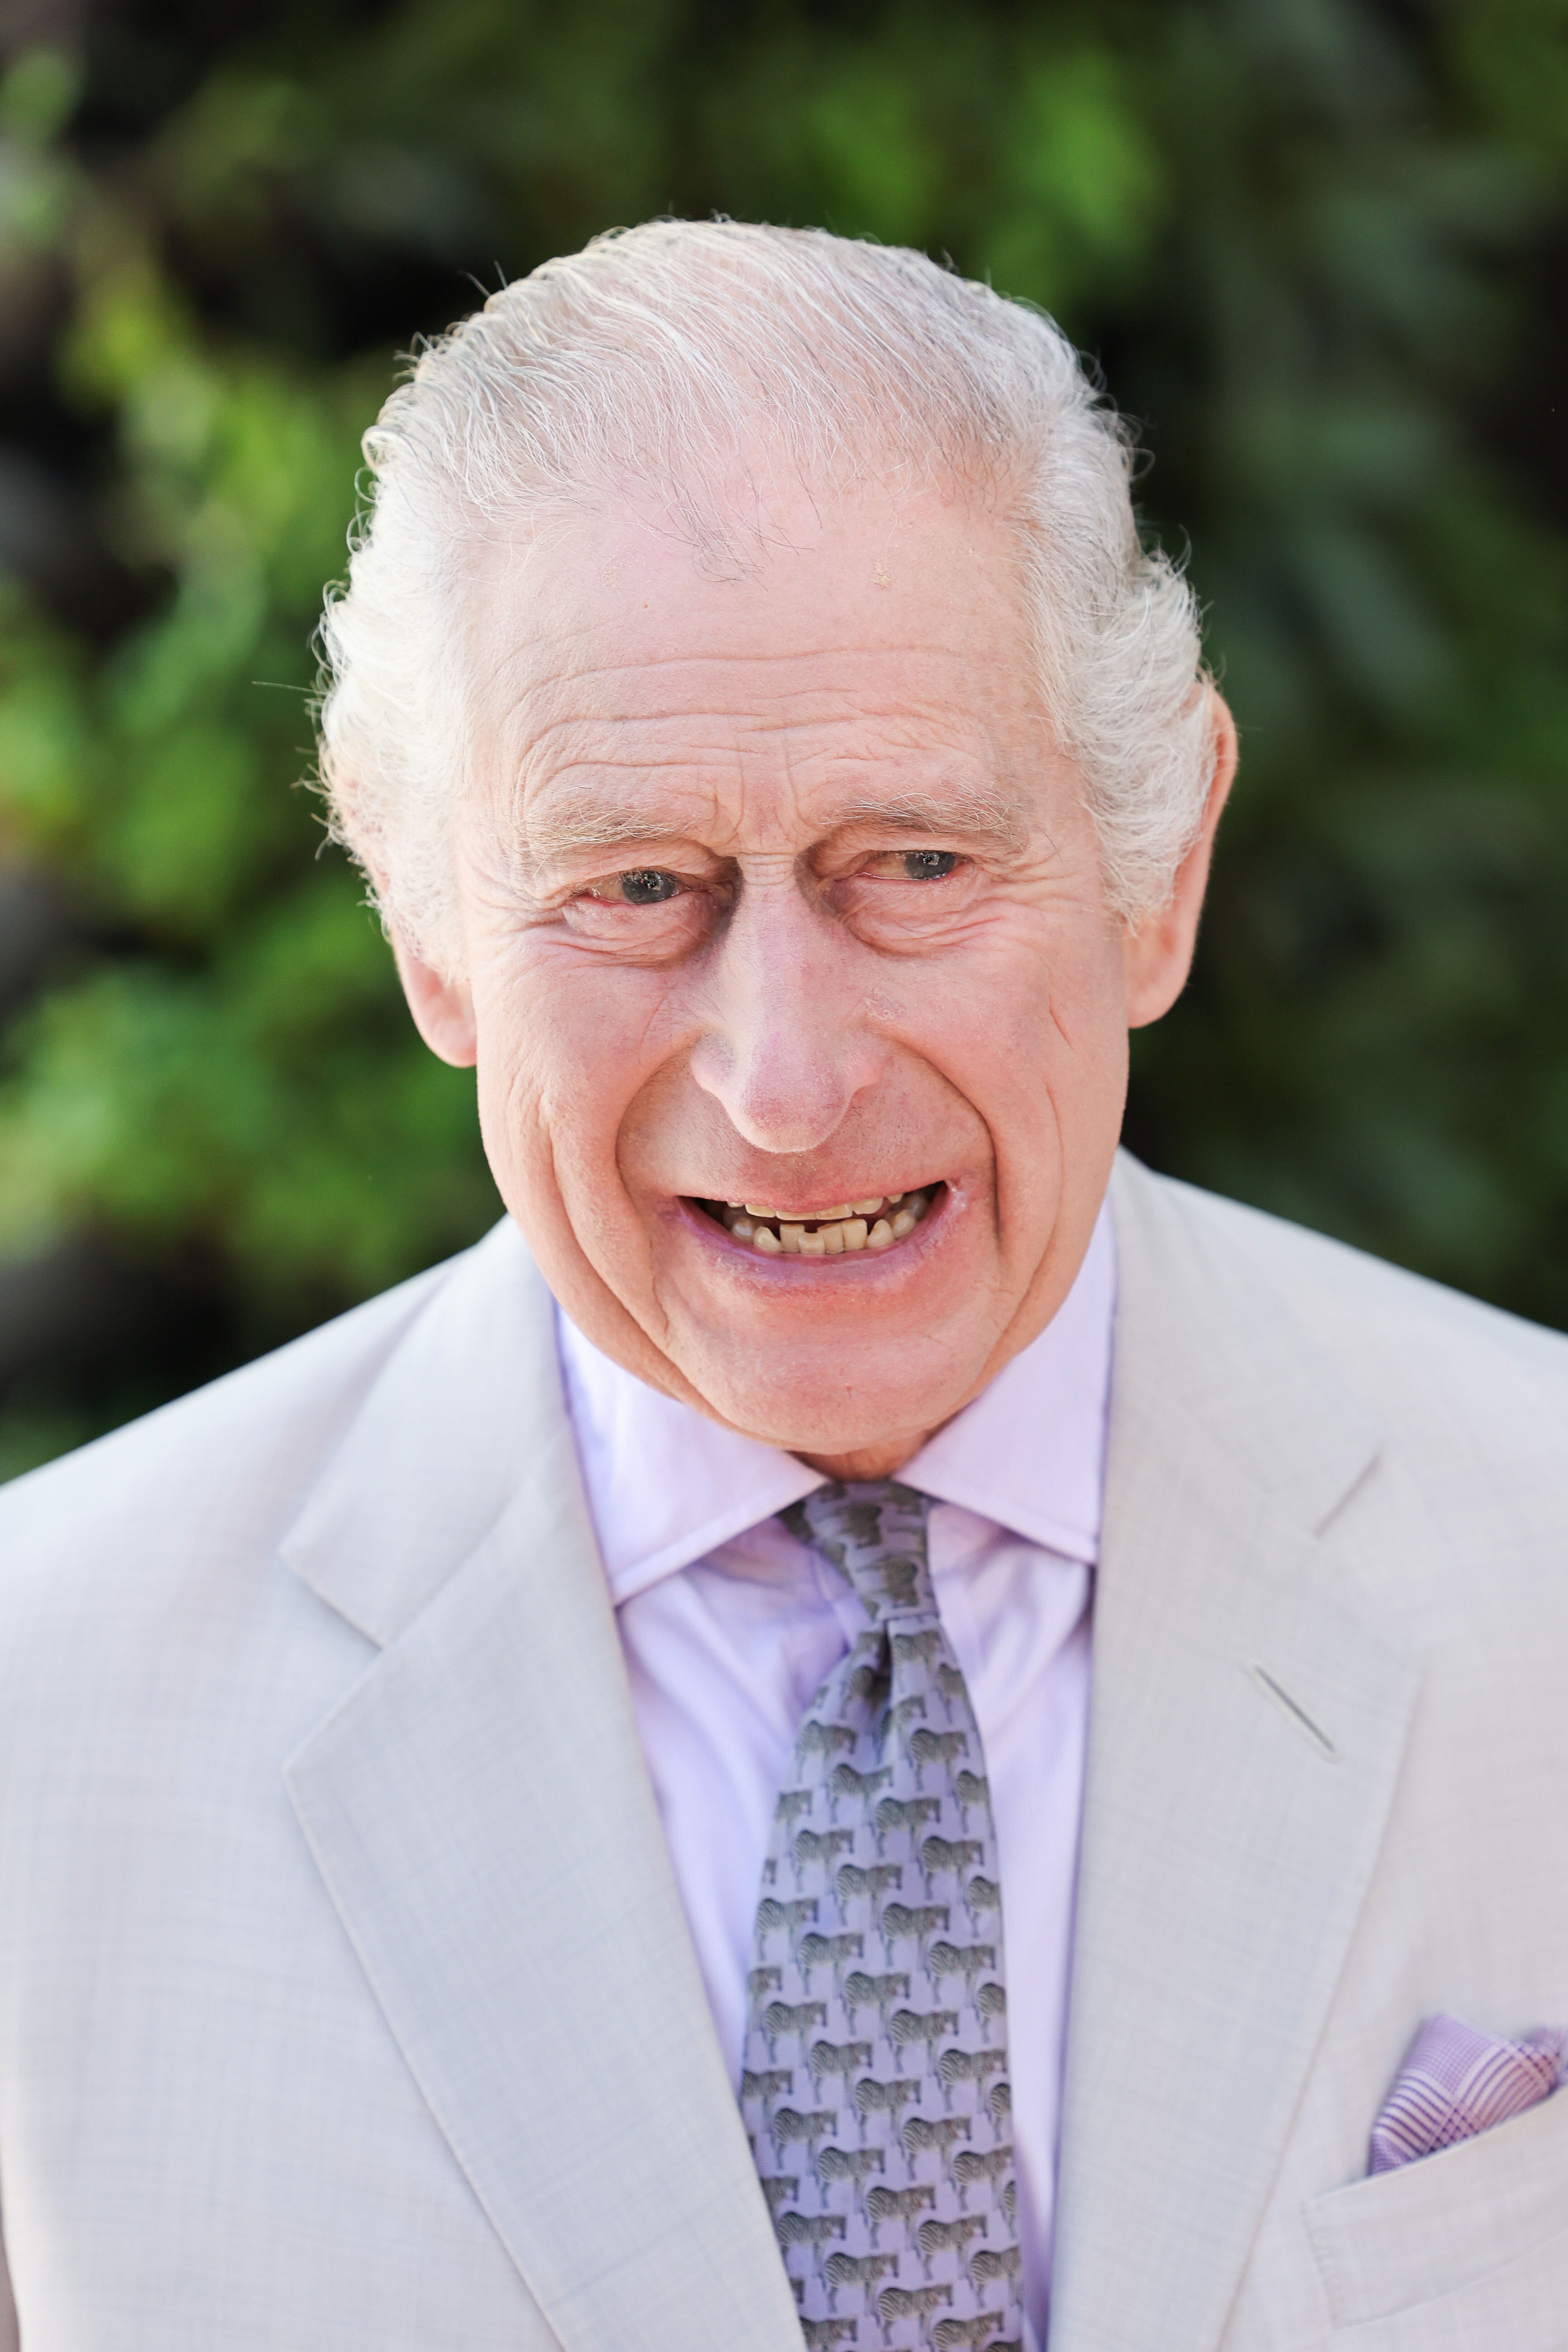 King Charles III during a visit at the Heriot-Watt University to formally open the Dubai campus during COP28 in Dubai, United Arab Emirates on November 30, 2023. | Source: Getty Images